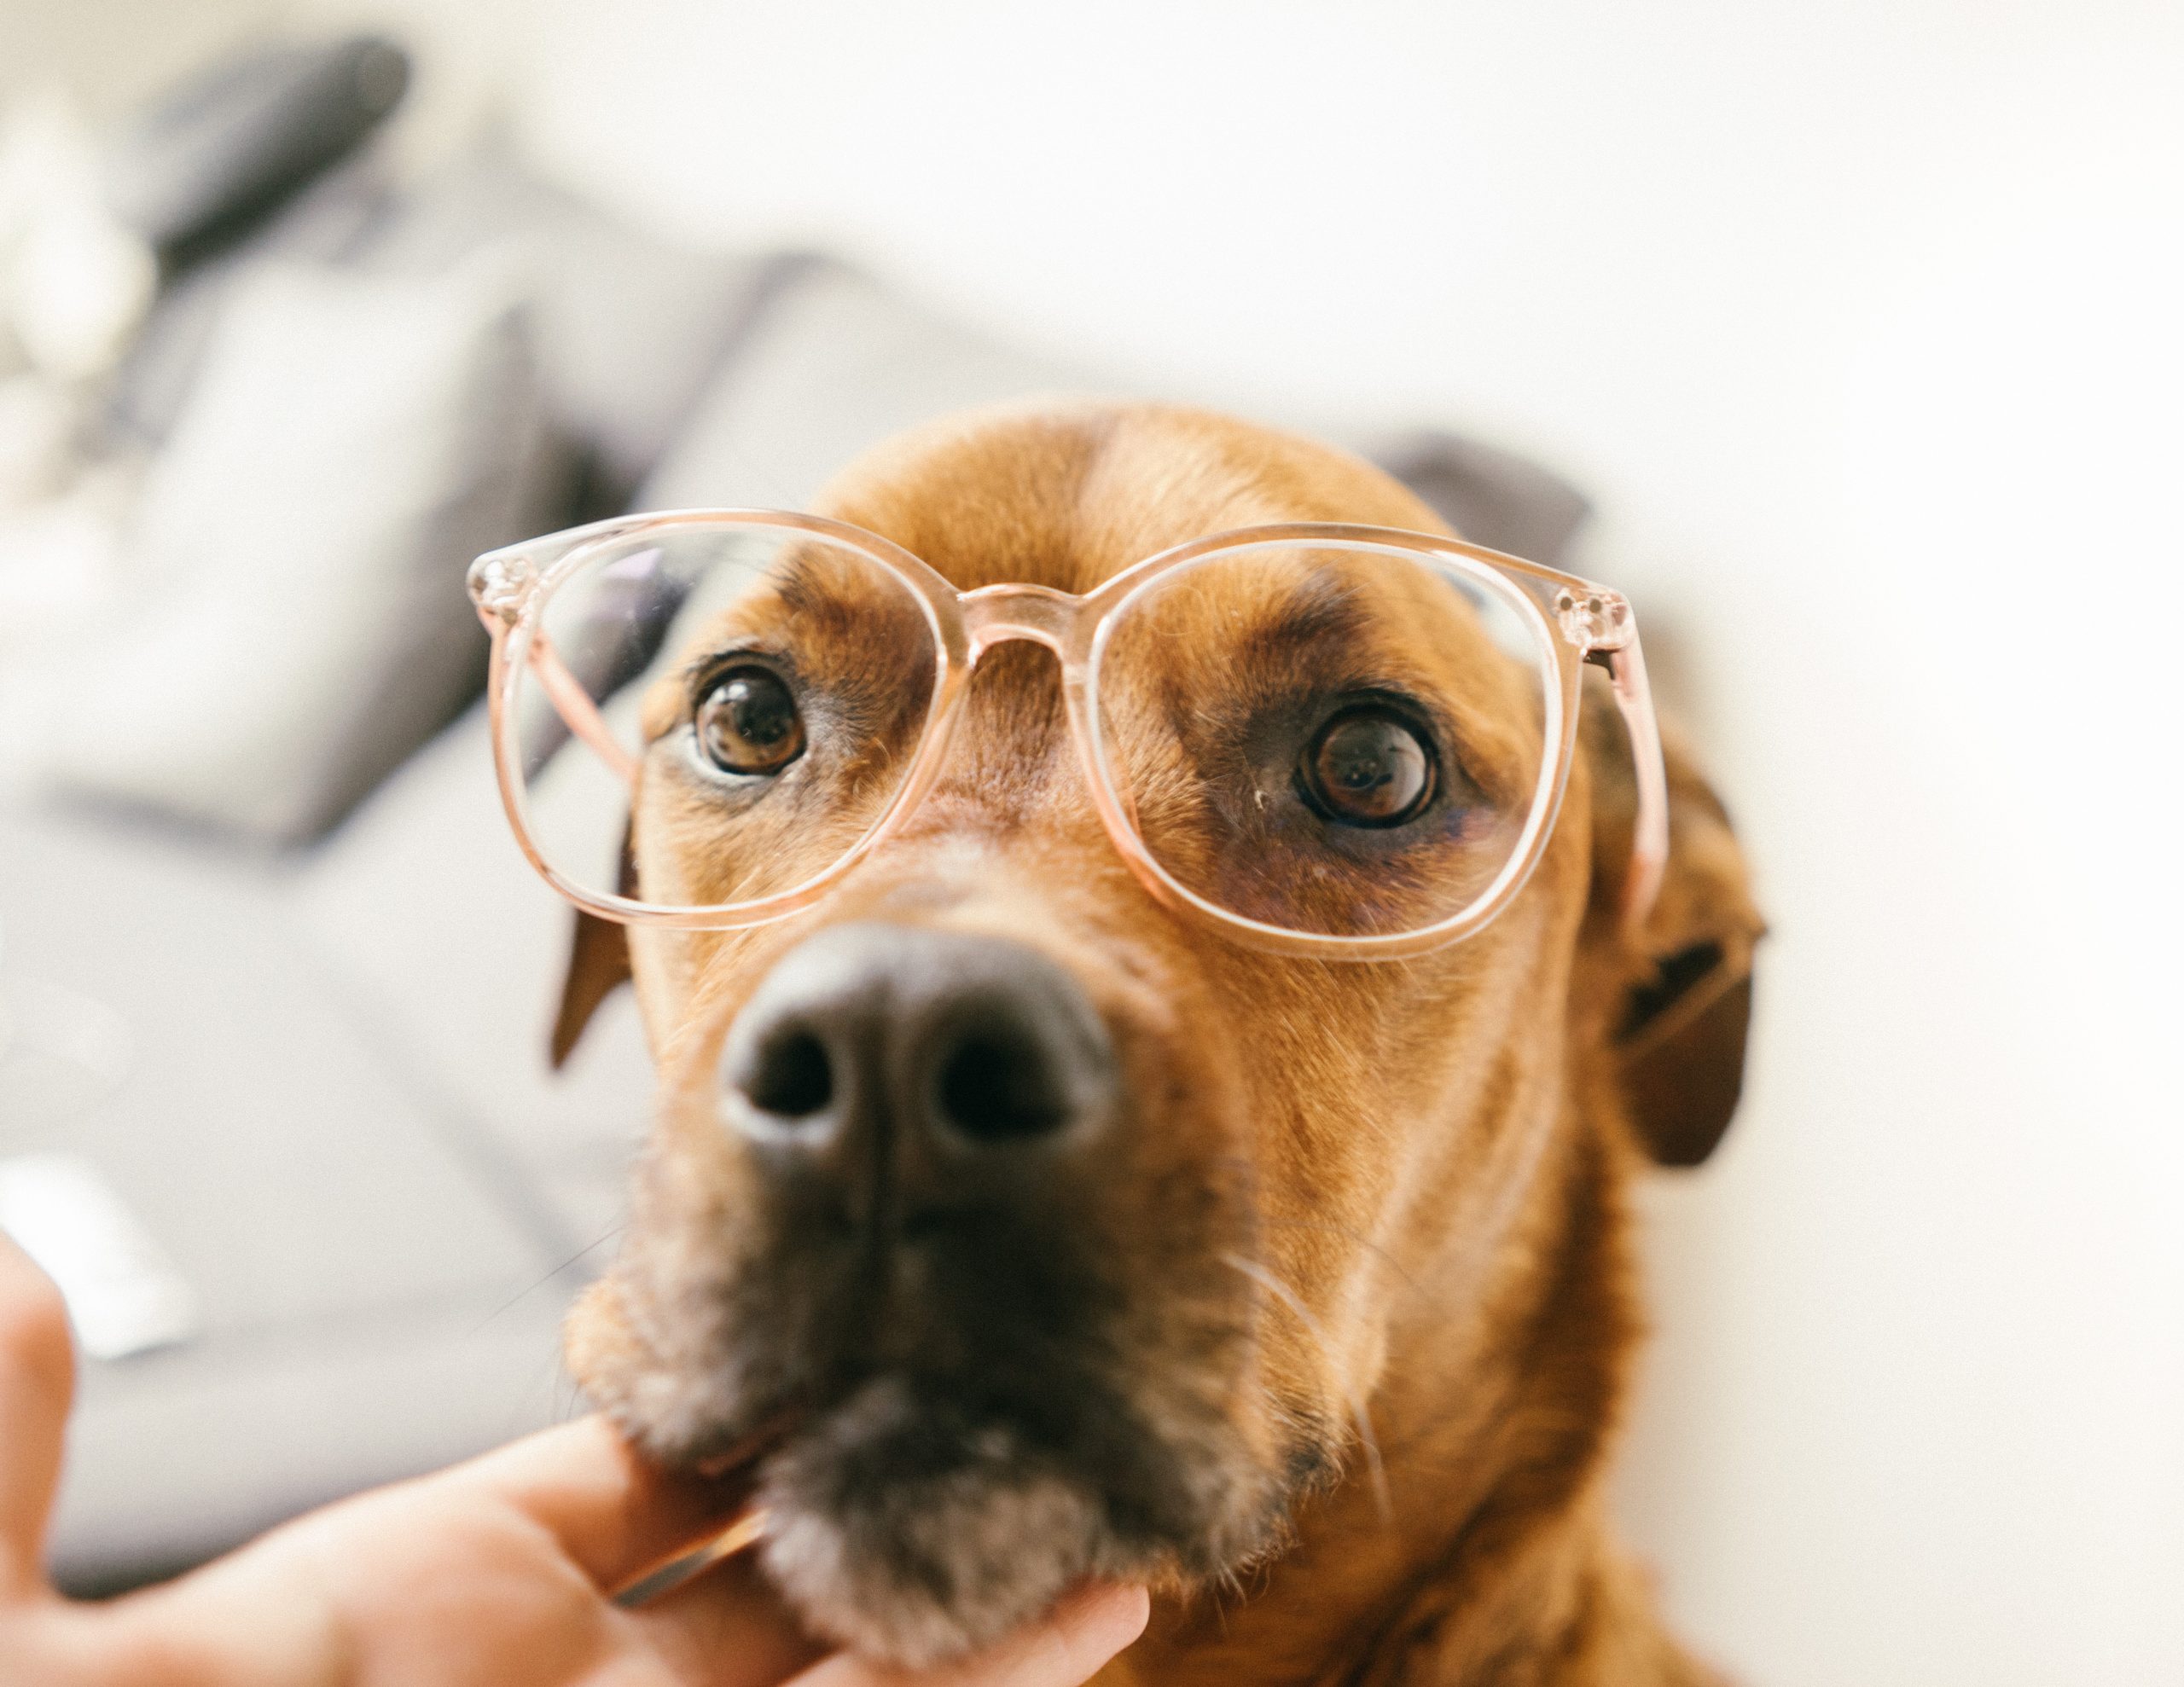 An alert dog with glasses